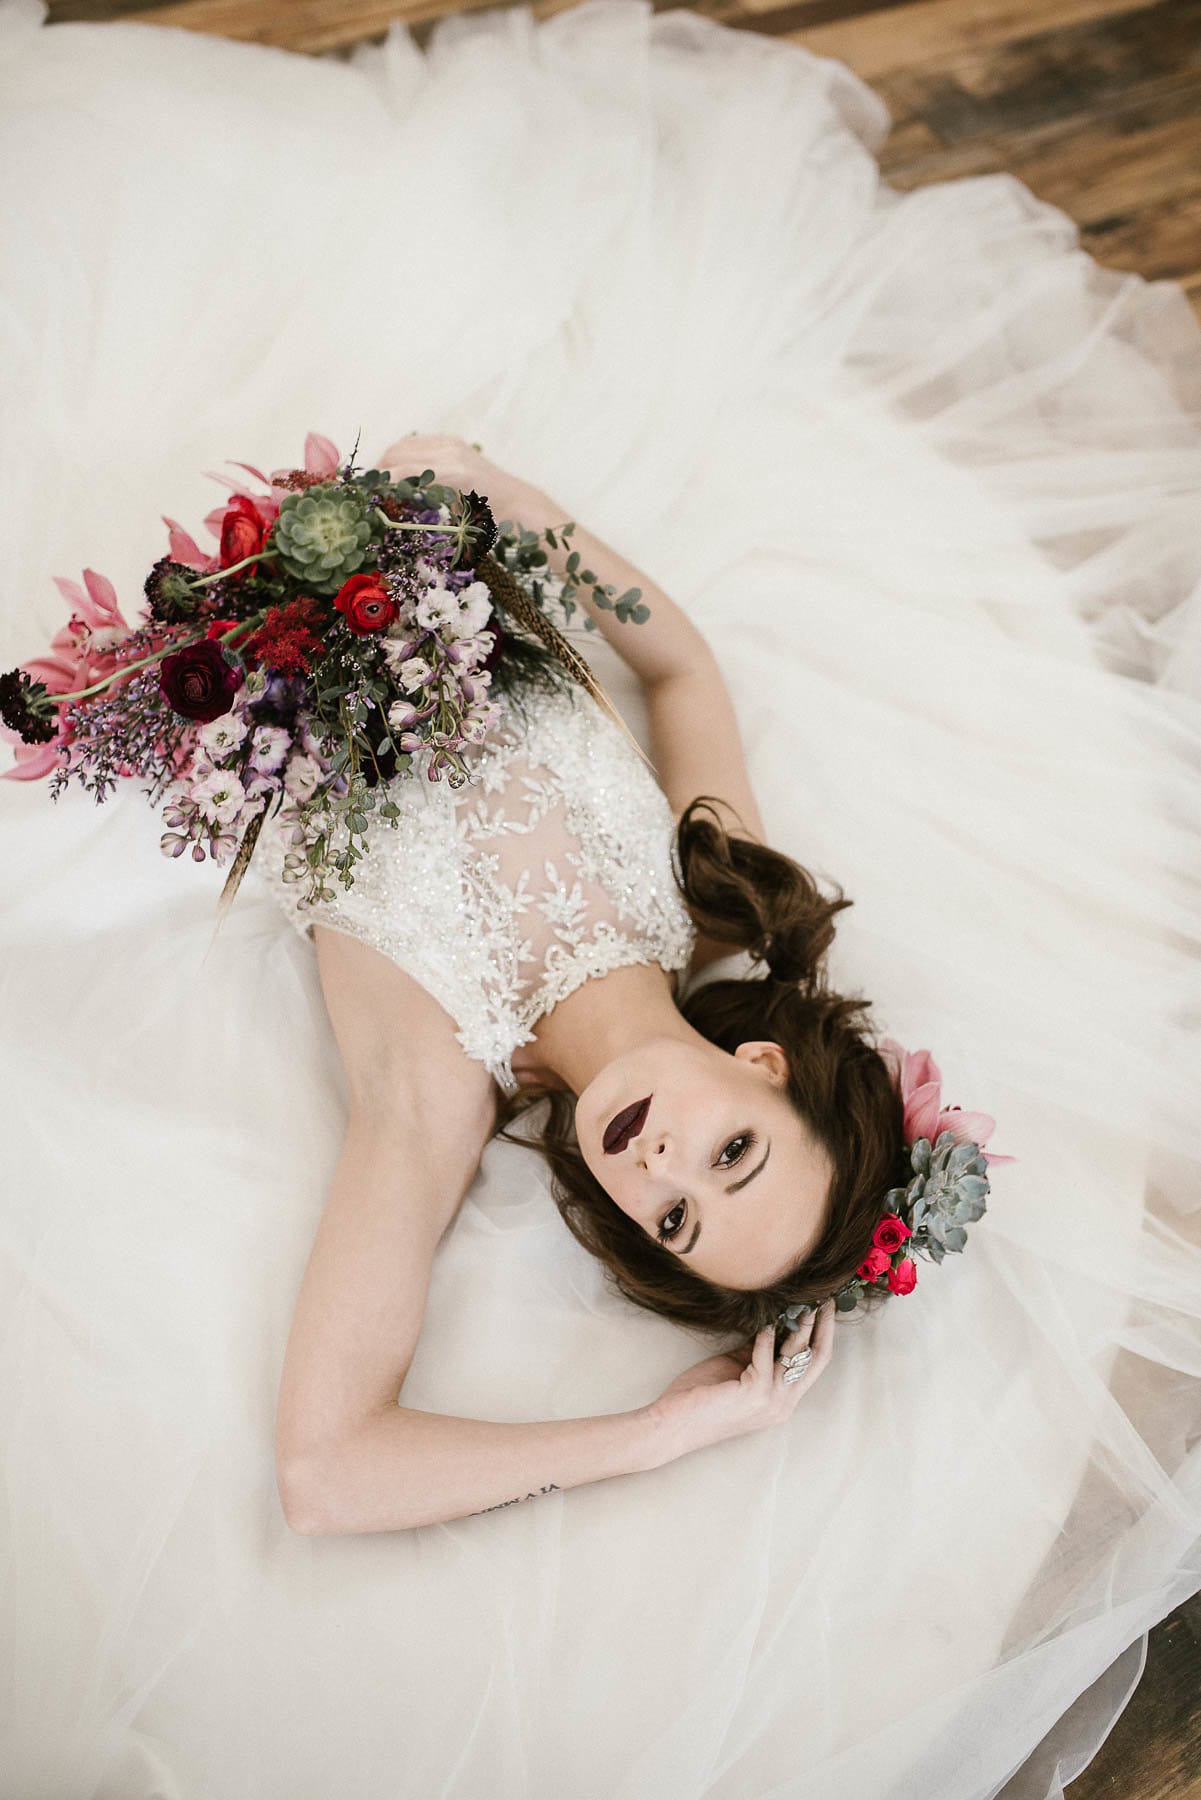 Princess Wedding Dress in Moody Styled Shoot With Jewel-toned Florals